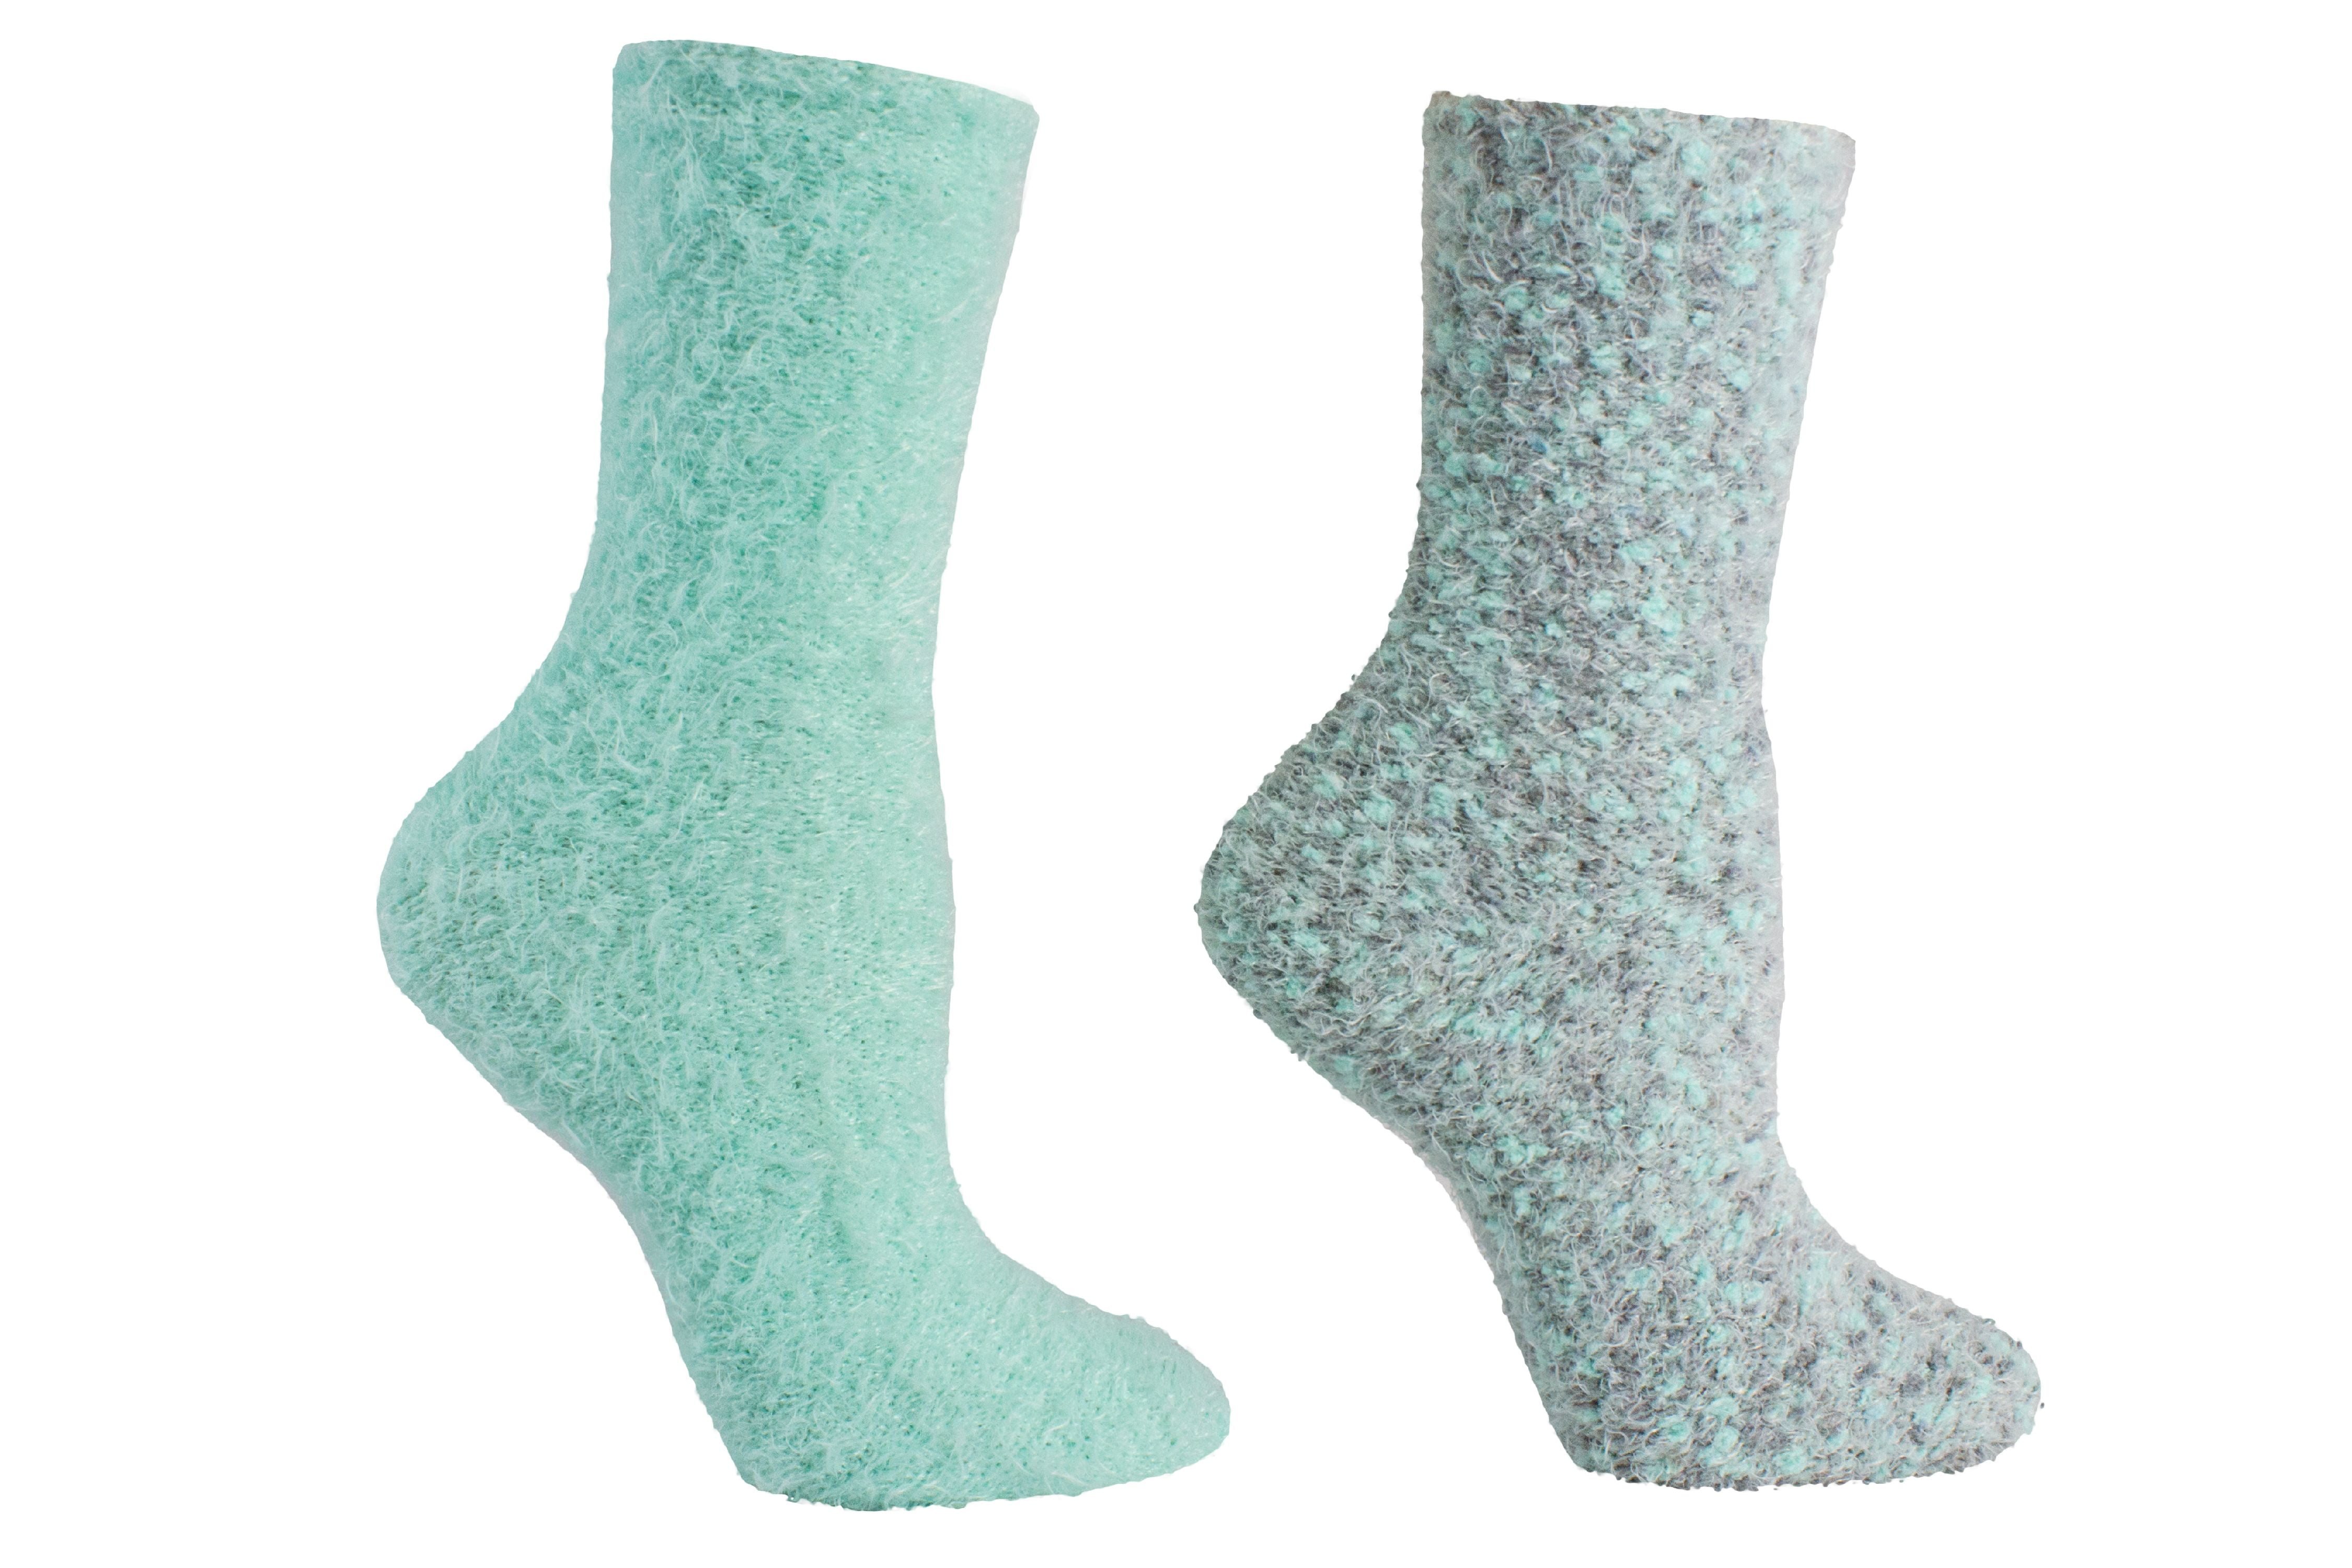 2 Pair Pack Fuzzy Lavender Infused Slipper Socks - Seafoam, One Size ...